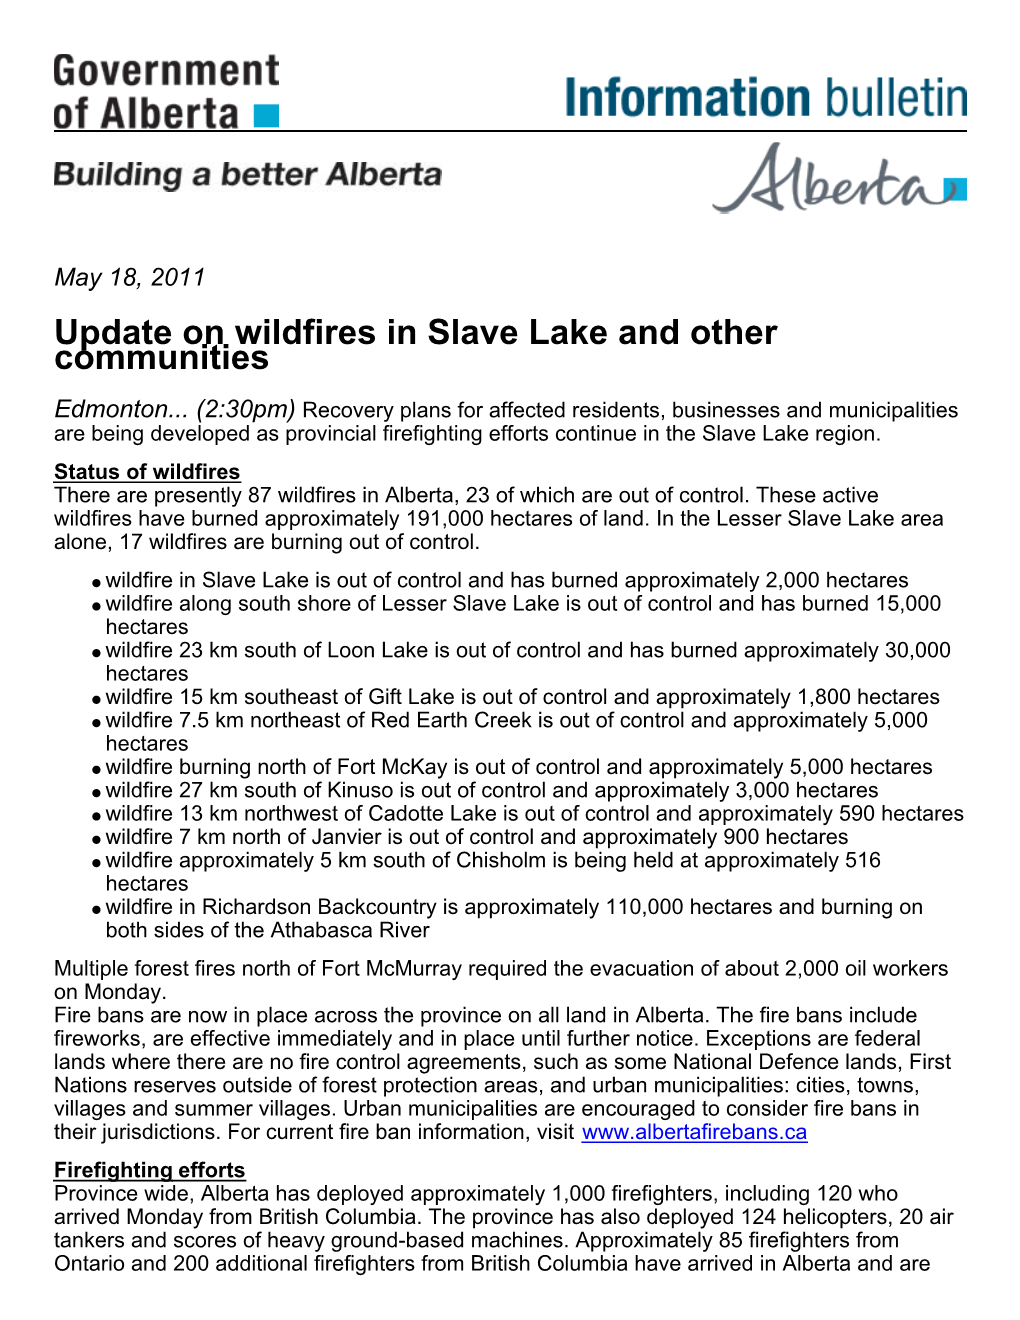 Update on Wildfires in Slave Lake and Other Communities